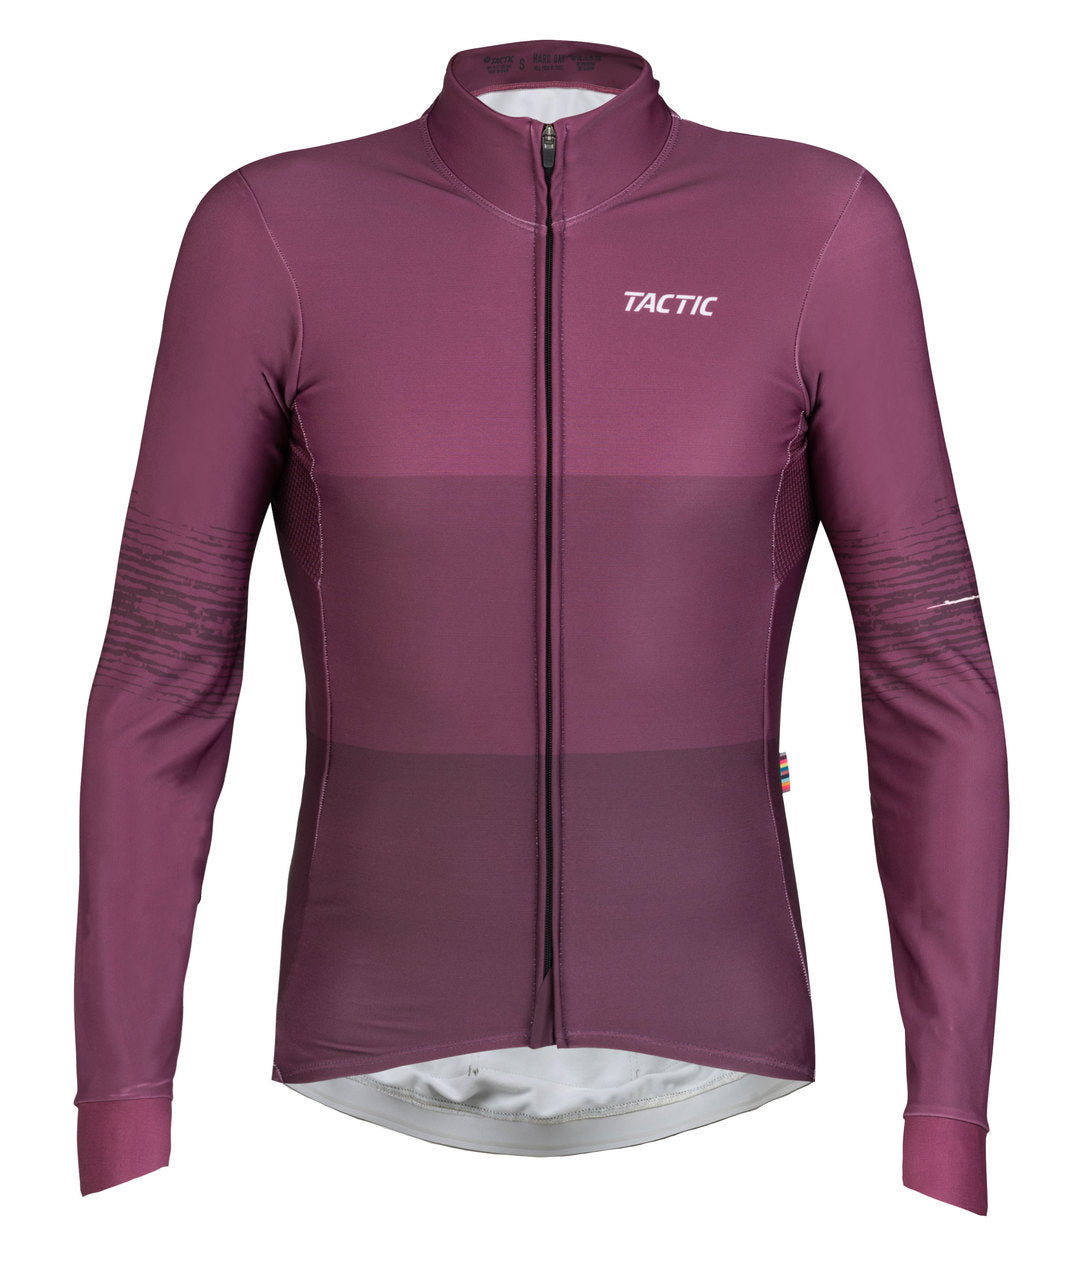 TACTIC Hard Day Maniga LLarga Maillot de Ciclisme - Berry archived